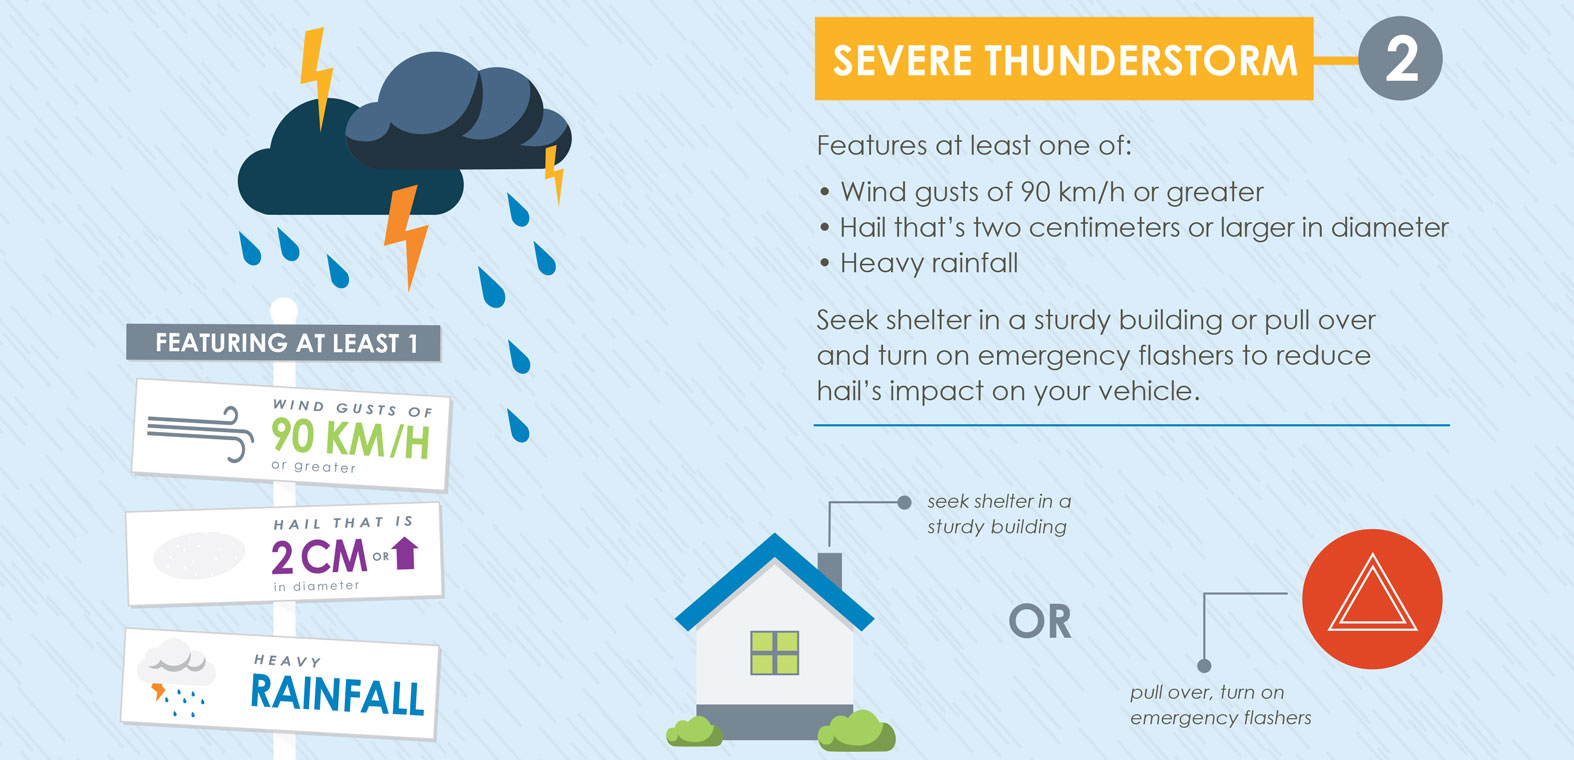 Federated infographic highlighting severe thunderstorm warnings